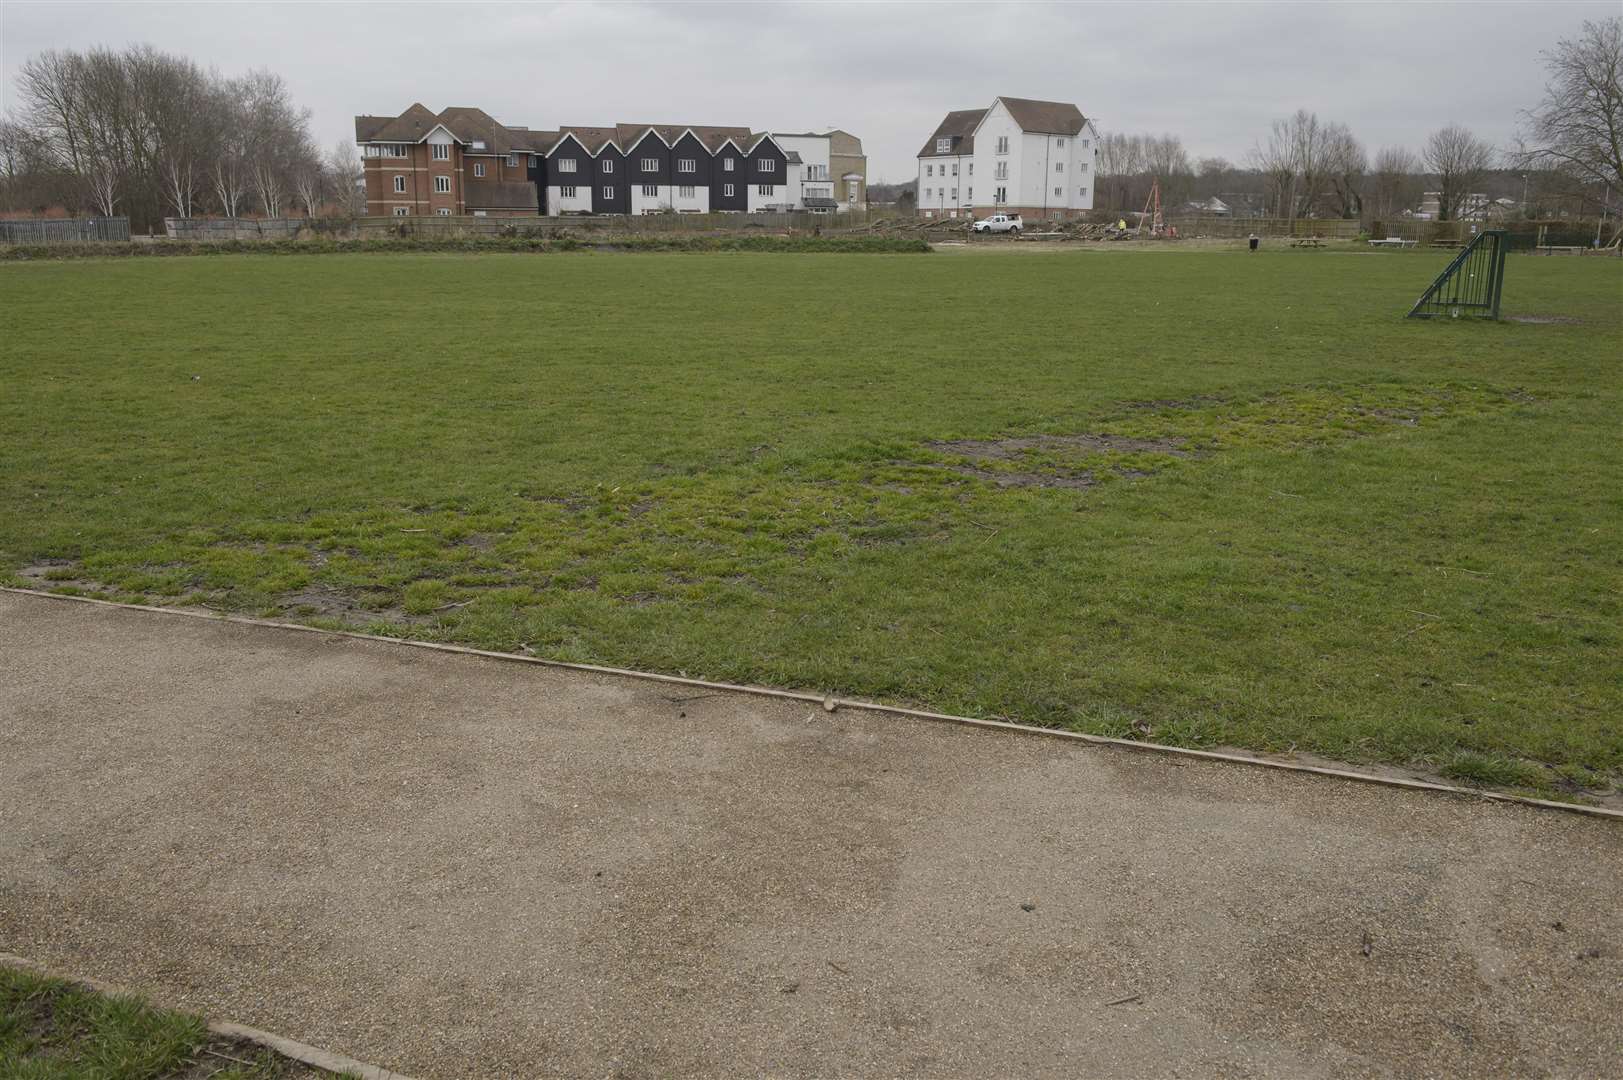 The incident happened in Kingsmead Field, Canterbury